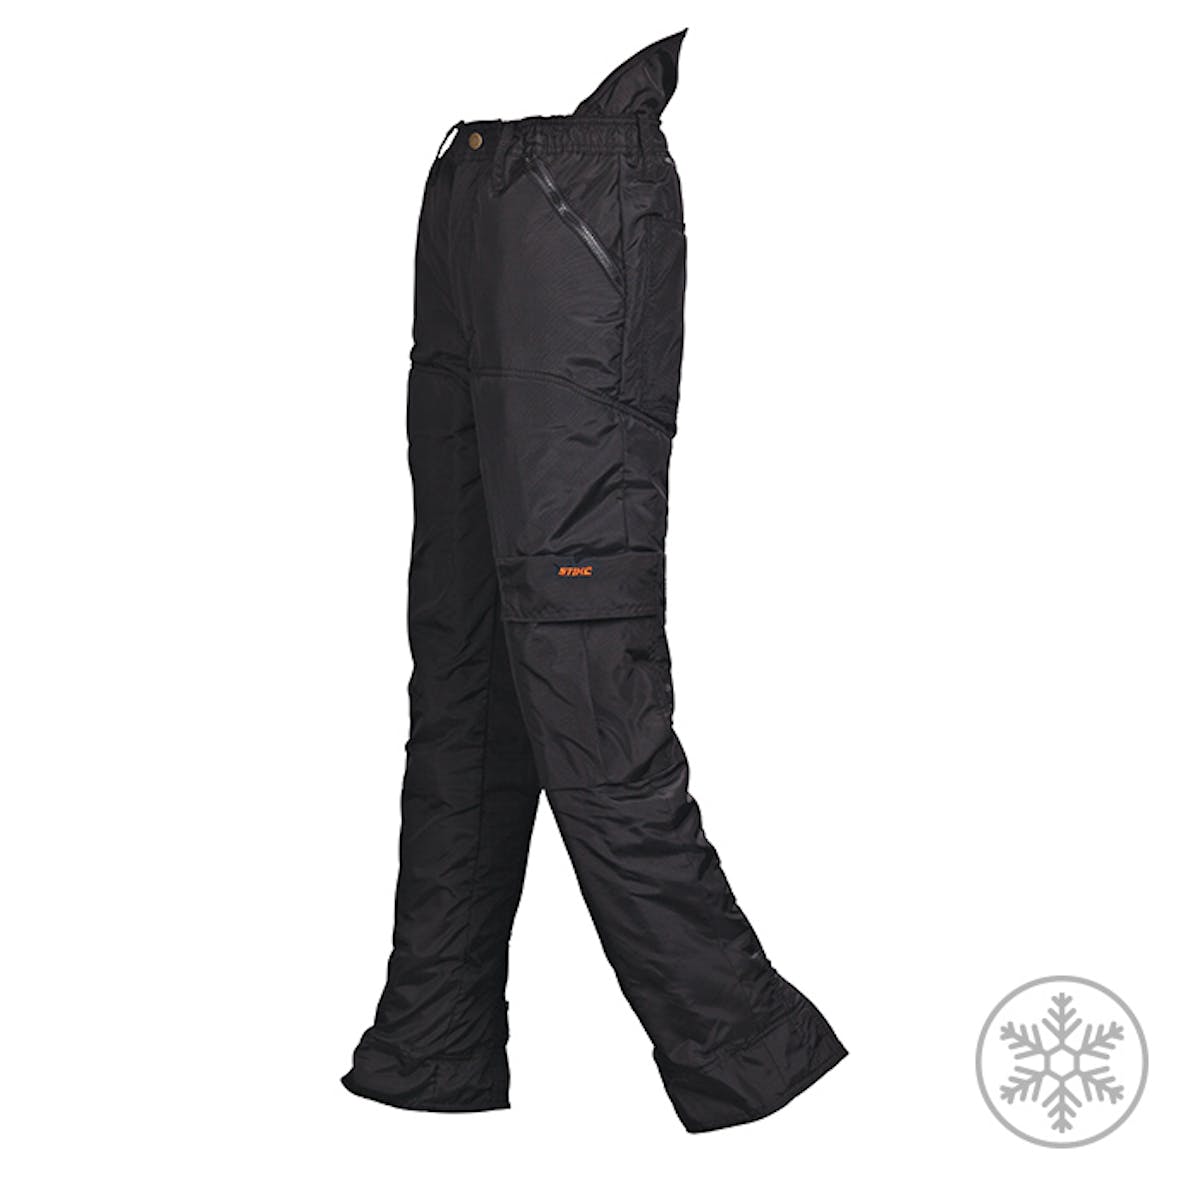 Dynamic Winter Protective Pants - 6 Layer